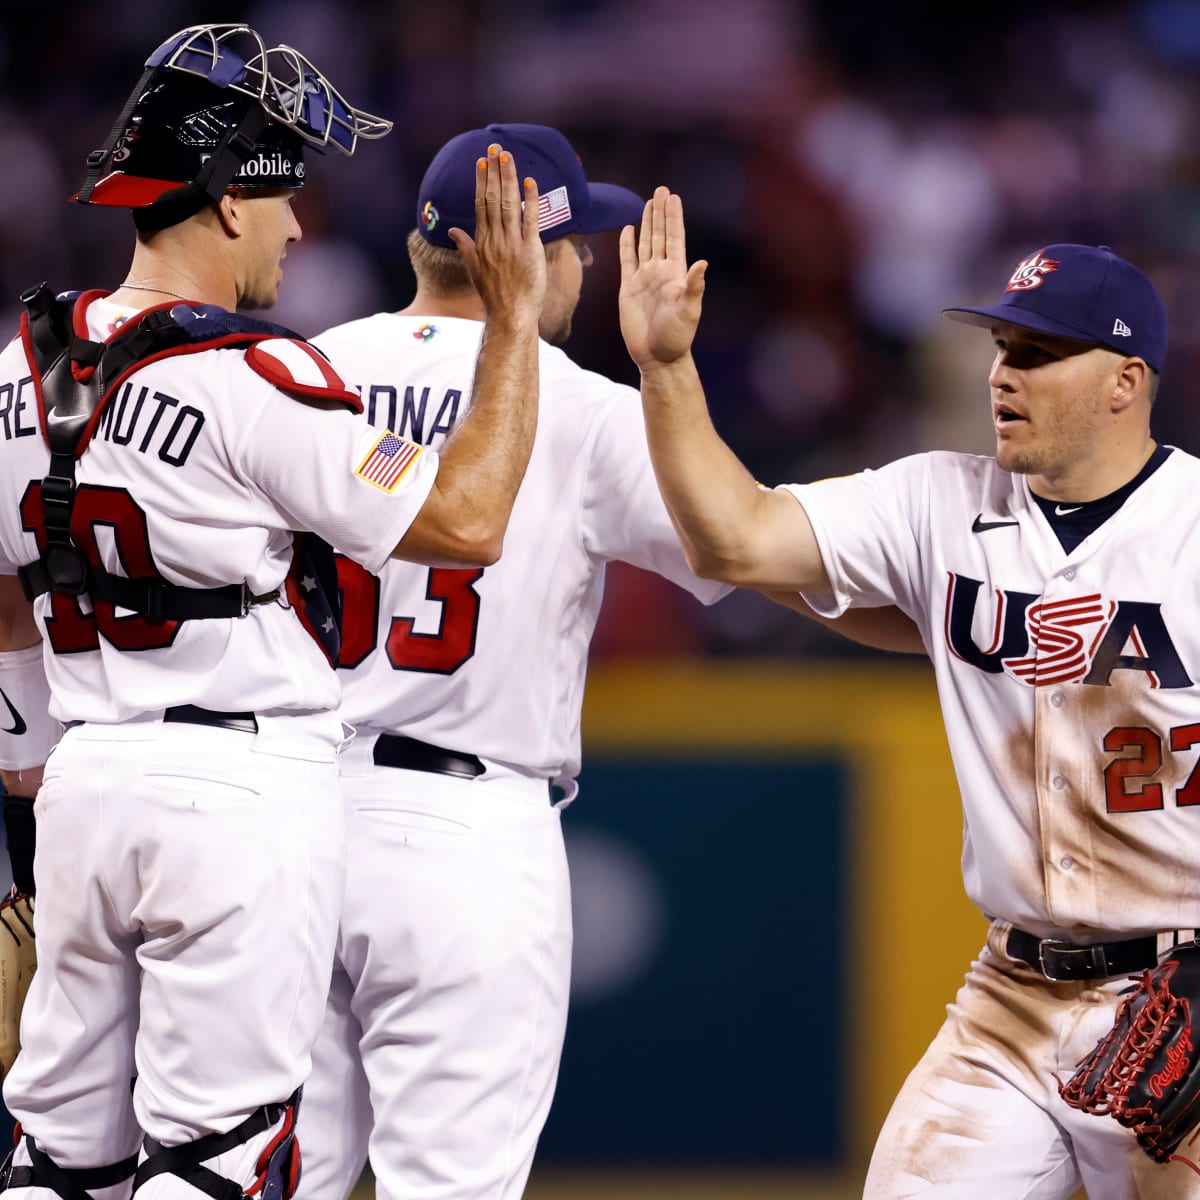 Trea Turner, J.T. Realmuto, and Kyle Schwarber look back on WBC